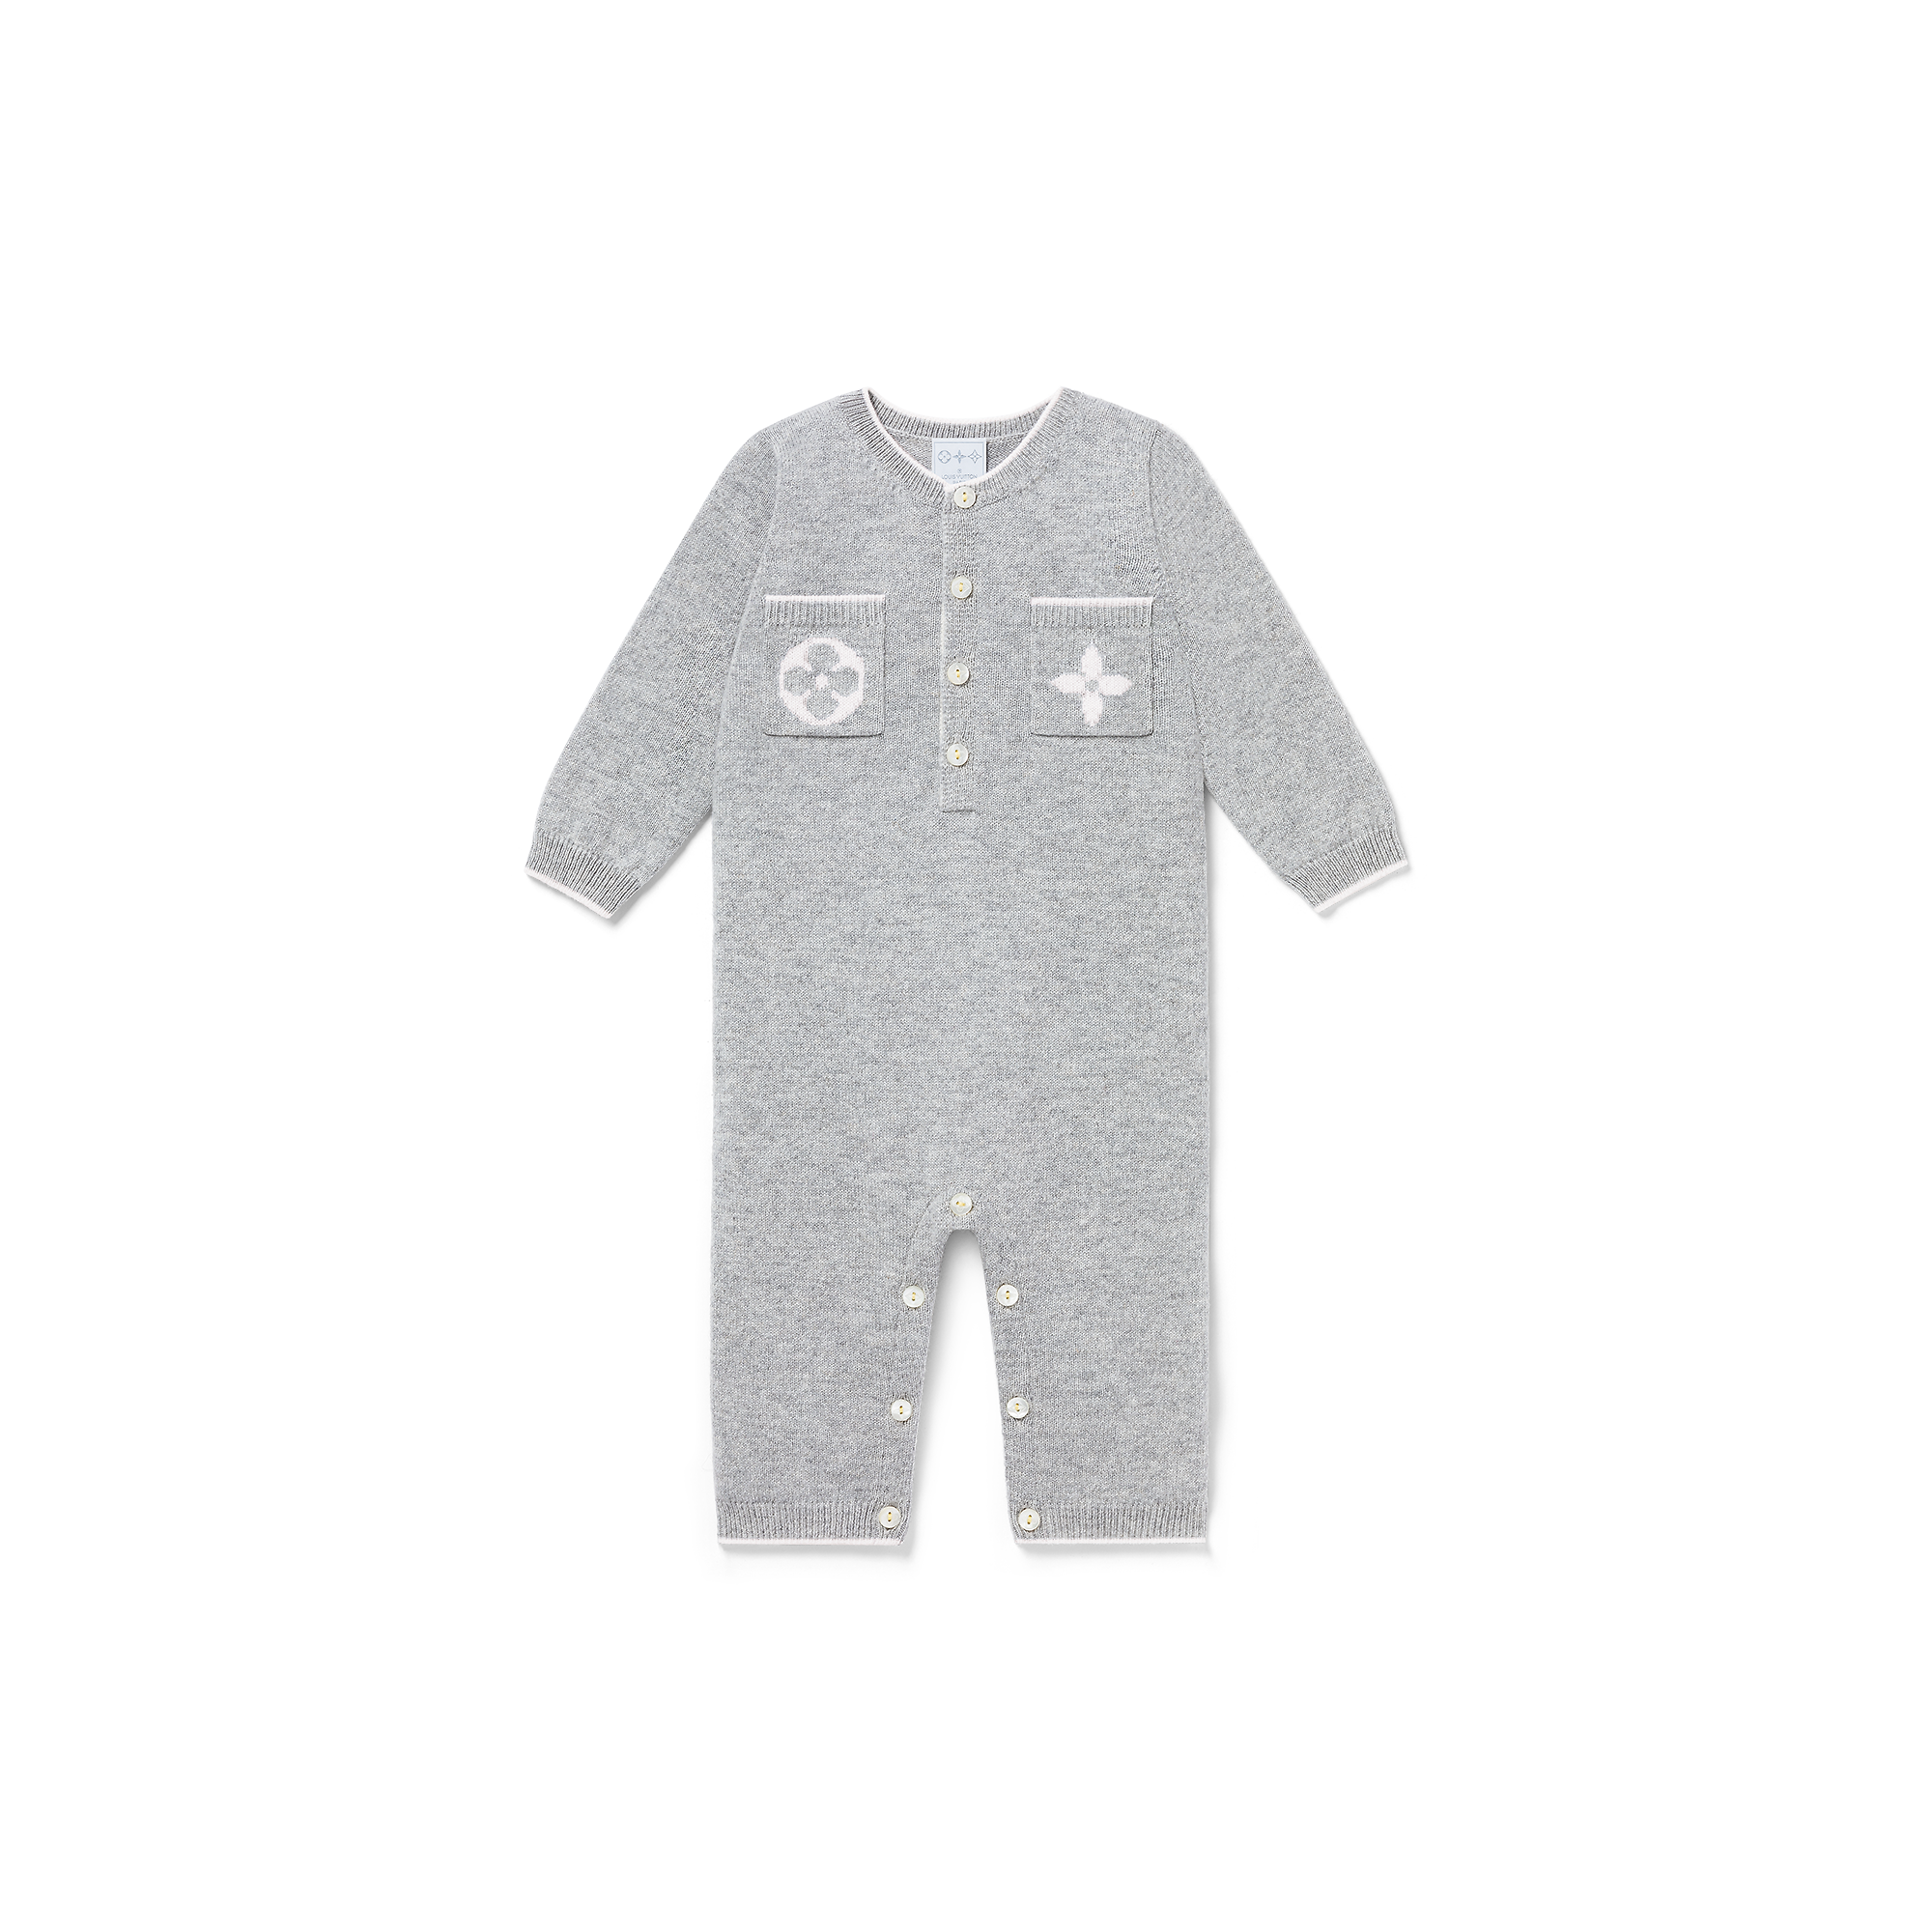 Louis Vuitton 2 Pockets Suit S00 – New – For Baby GI006D Grey White